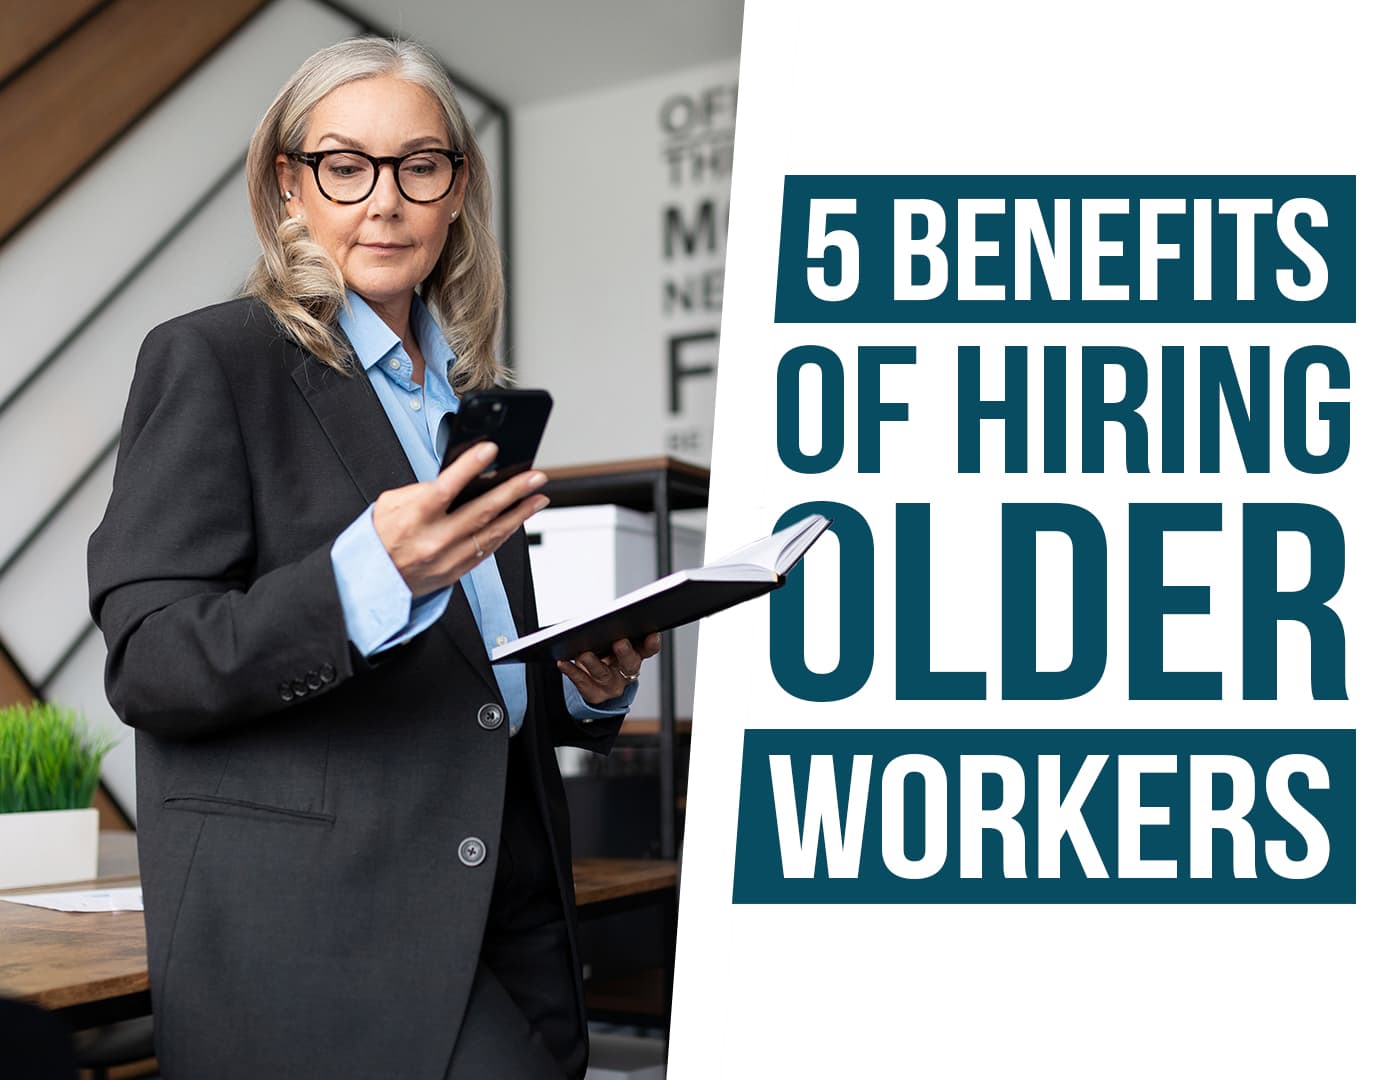 Benefits Of Hiring Older Workers City Personnel